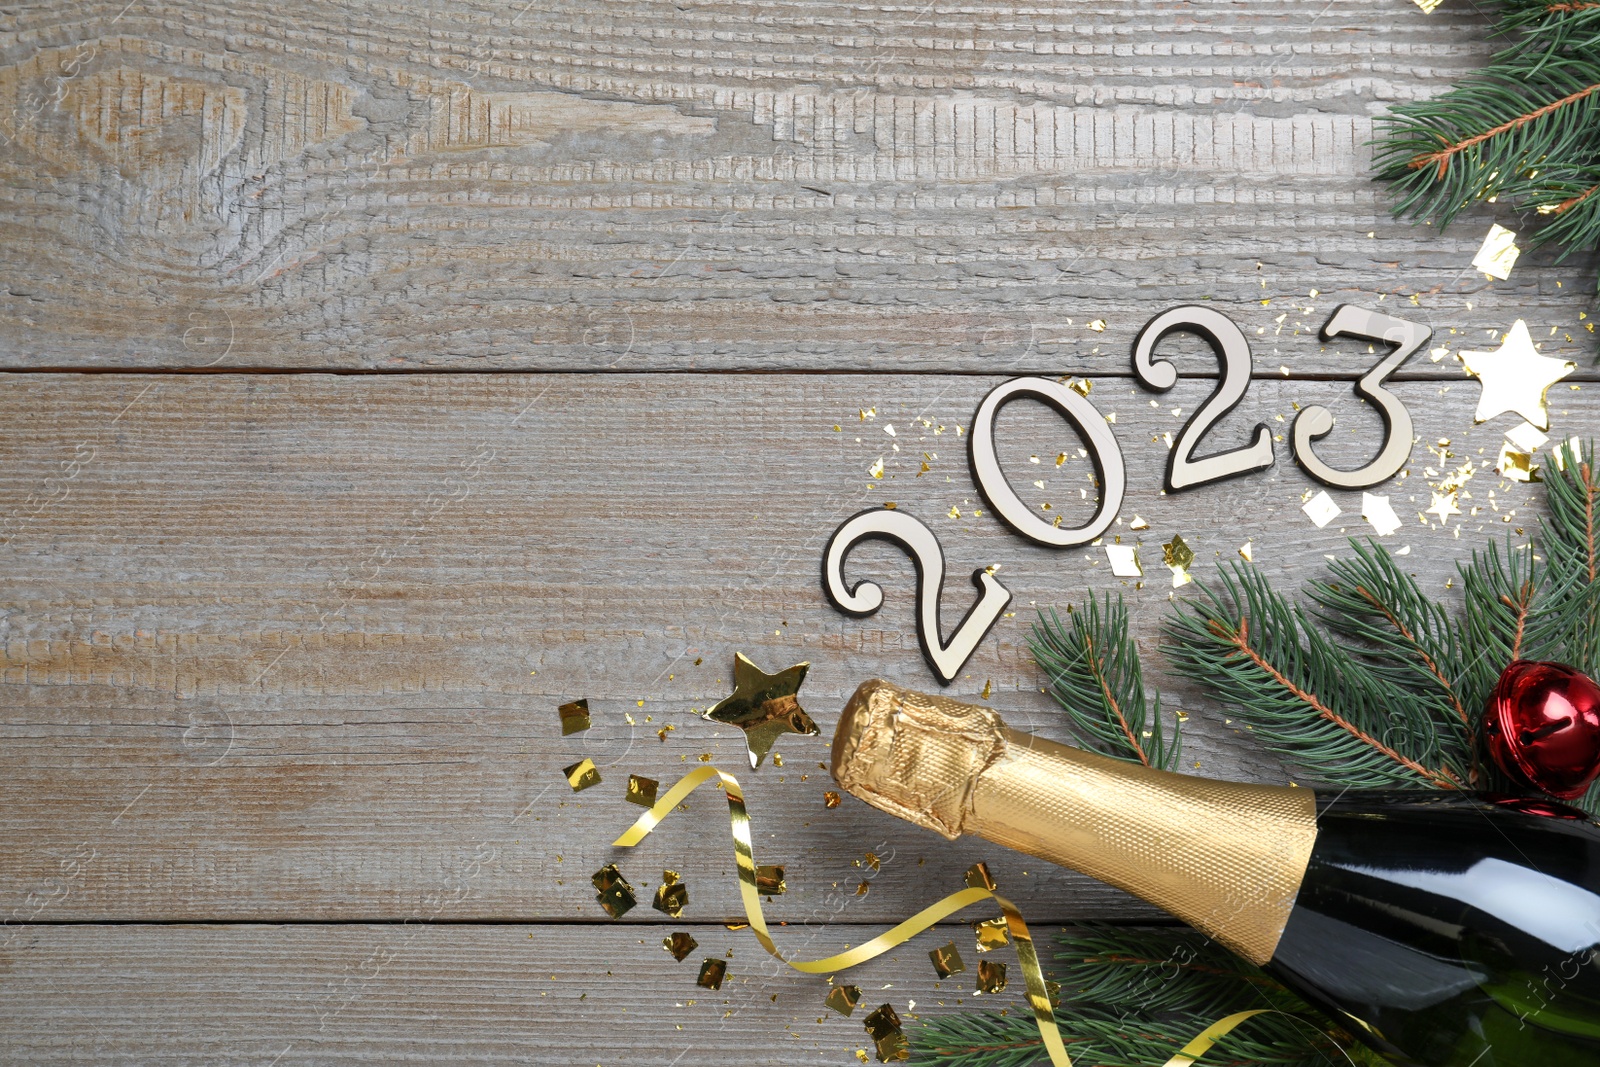 Photo of Happy New Year 2023! Flat lay composition with bottle of sparkling wine on wooden table, space for text